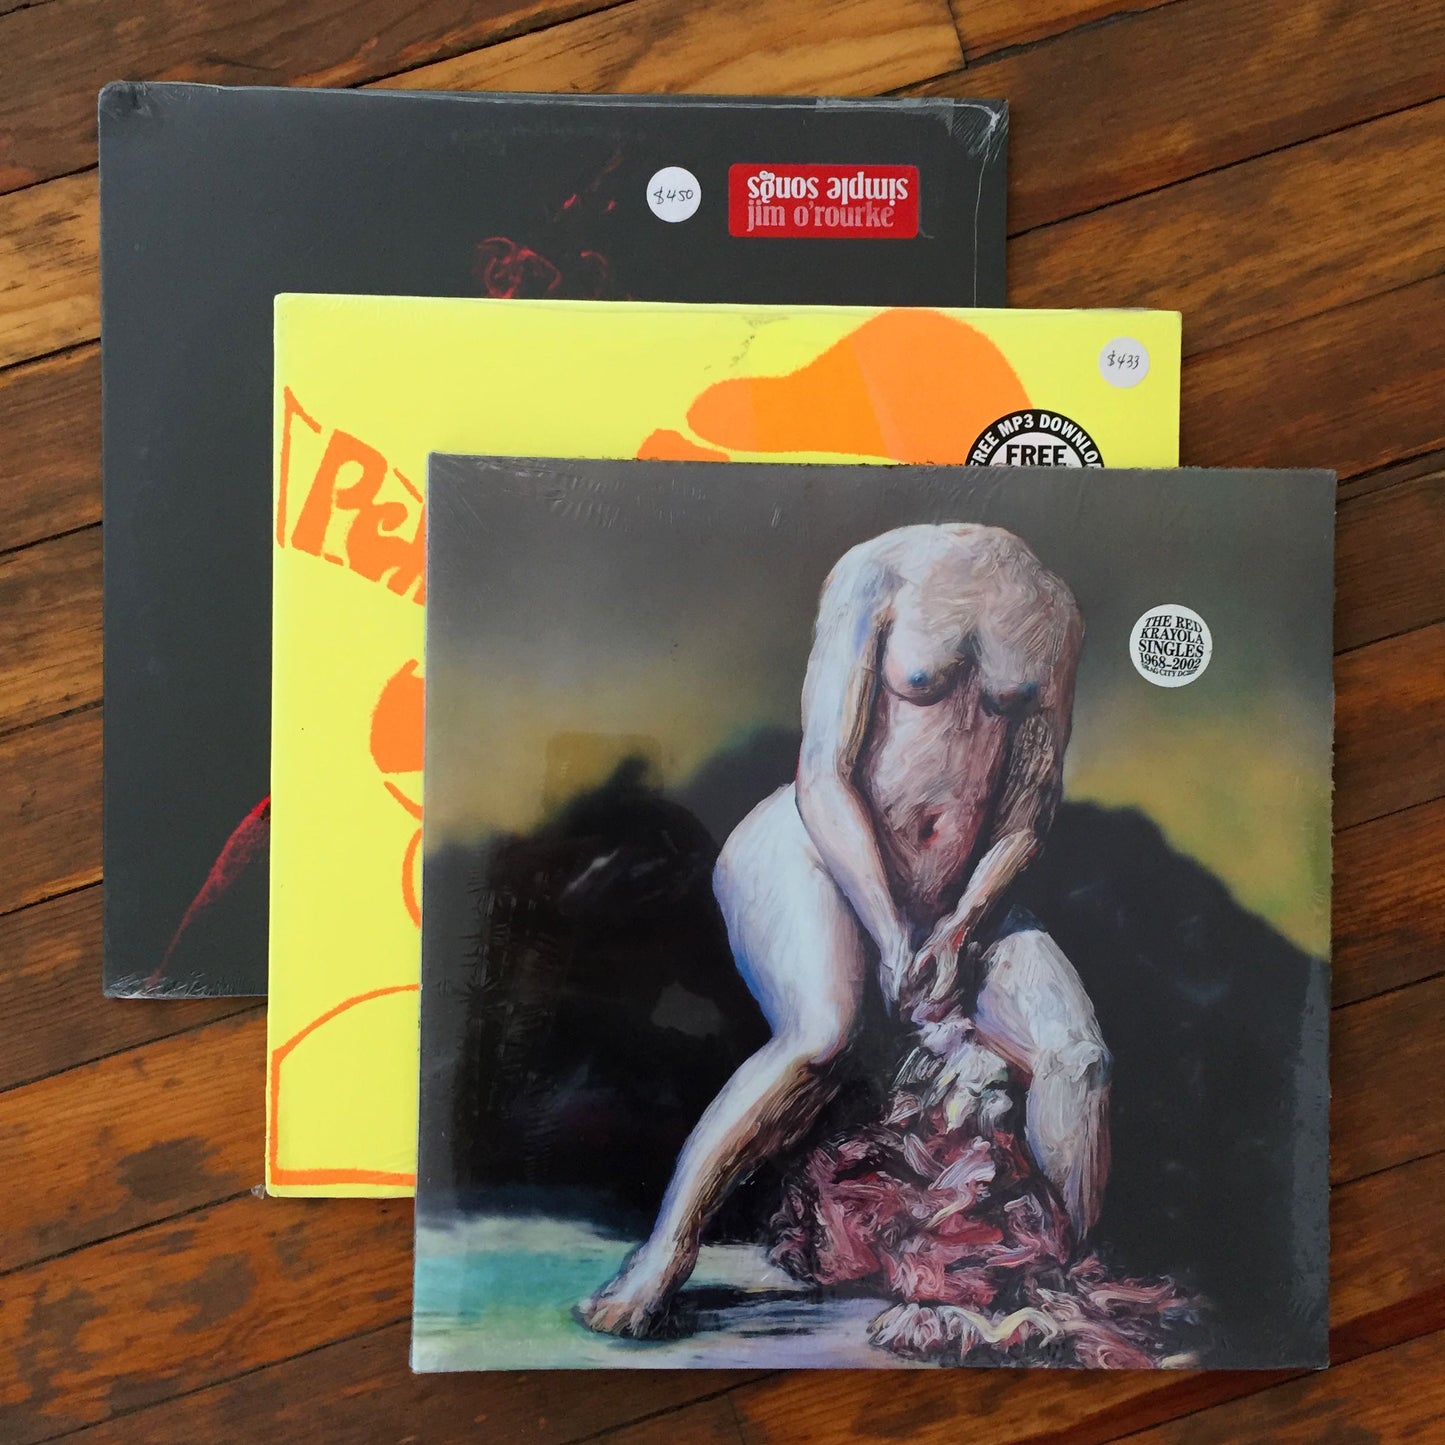 The Red Krayola, Jim O'Rourke, Stereolab - Pack 31 Vinil - Salvaje Music Store MEXICO